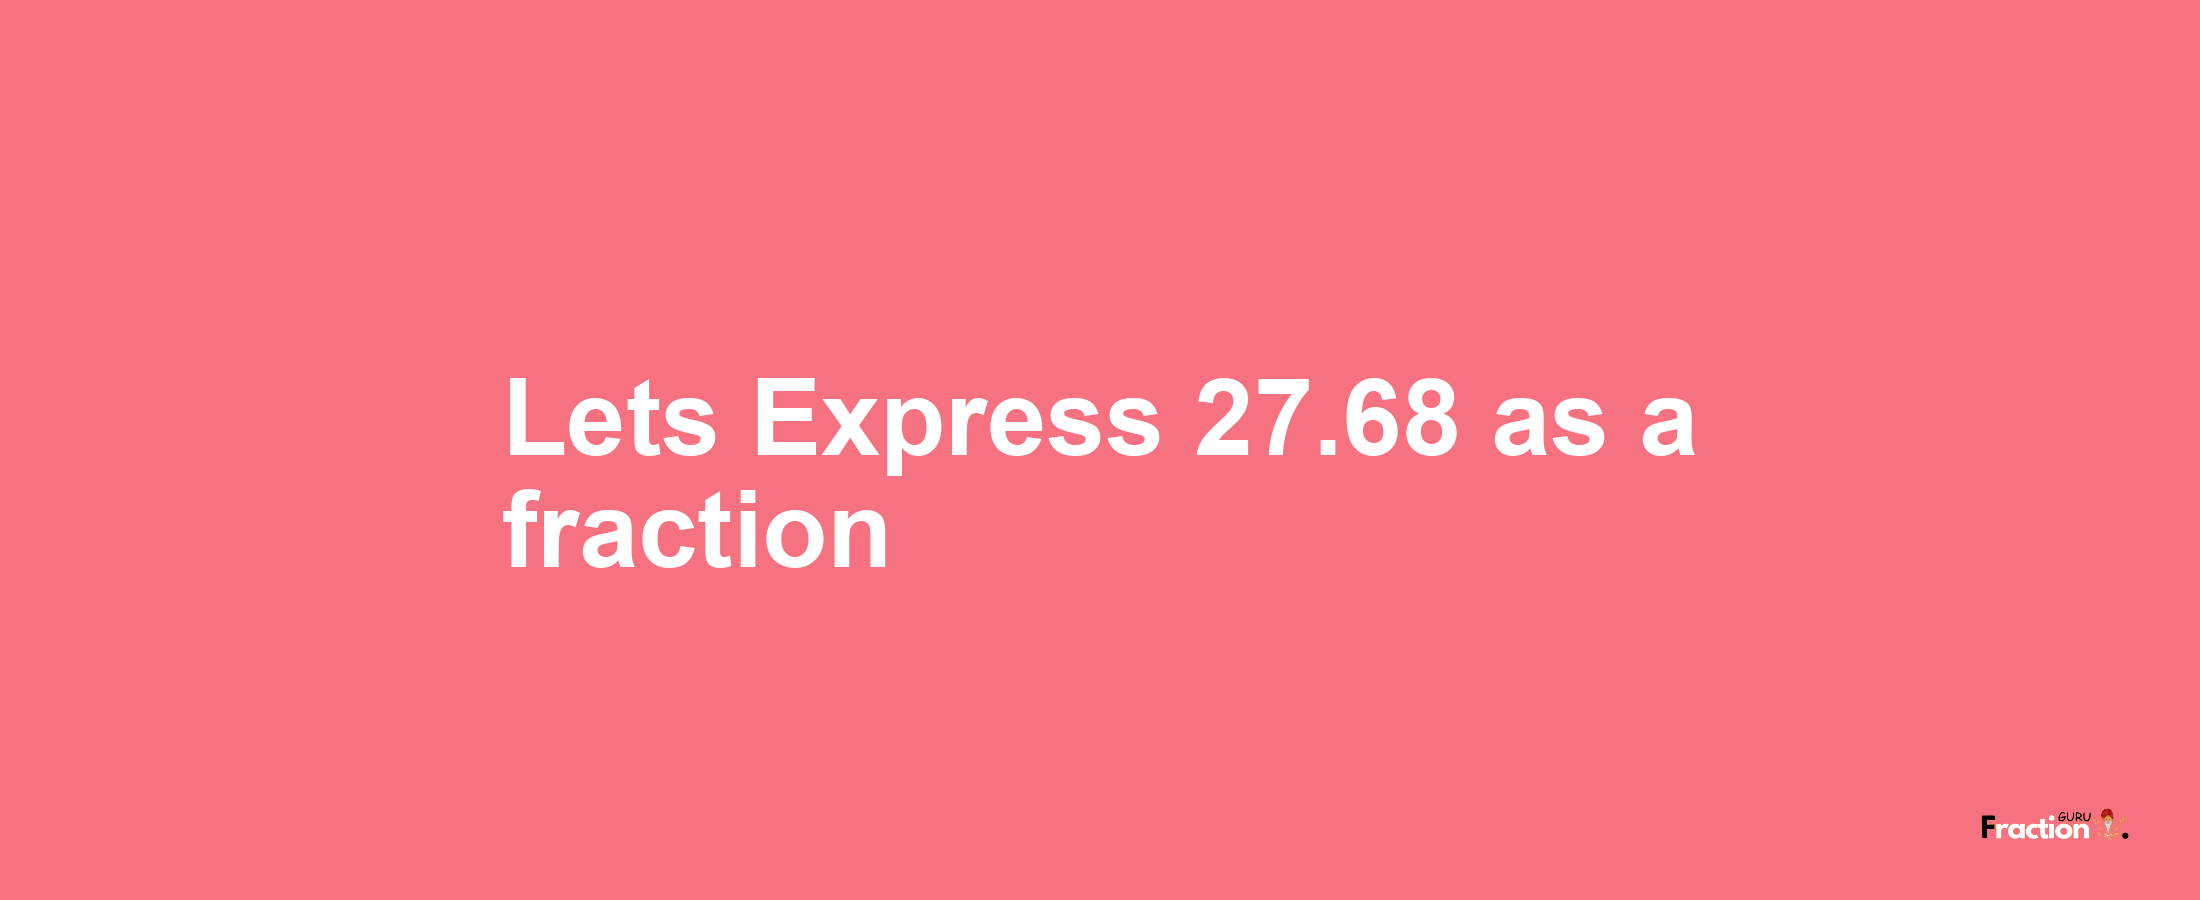 Lets Express 27.68 as afraction